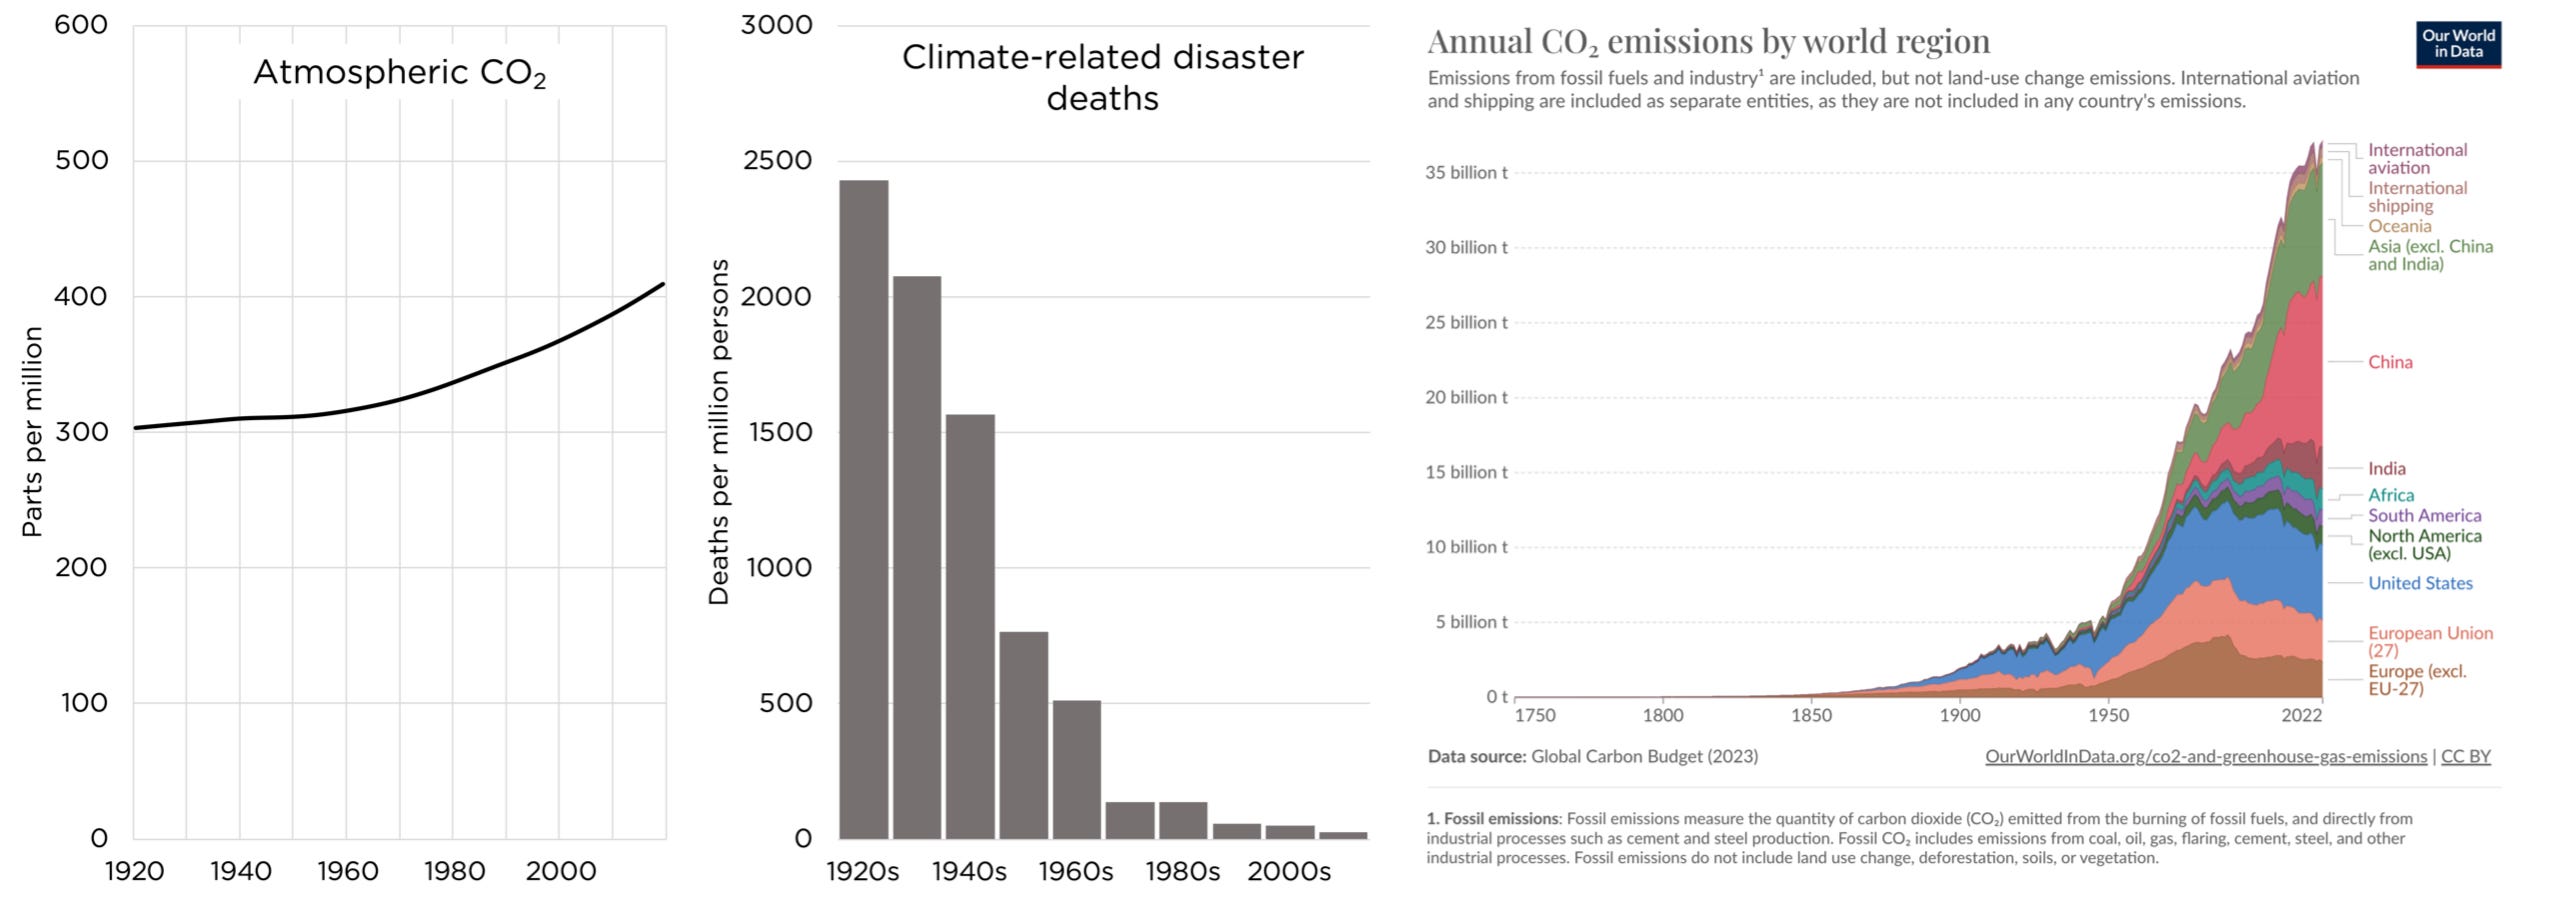 Emissions and climate deaths